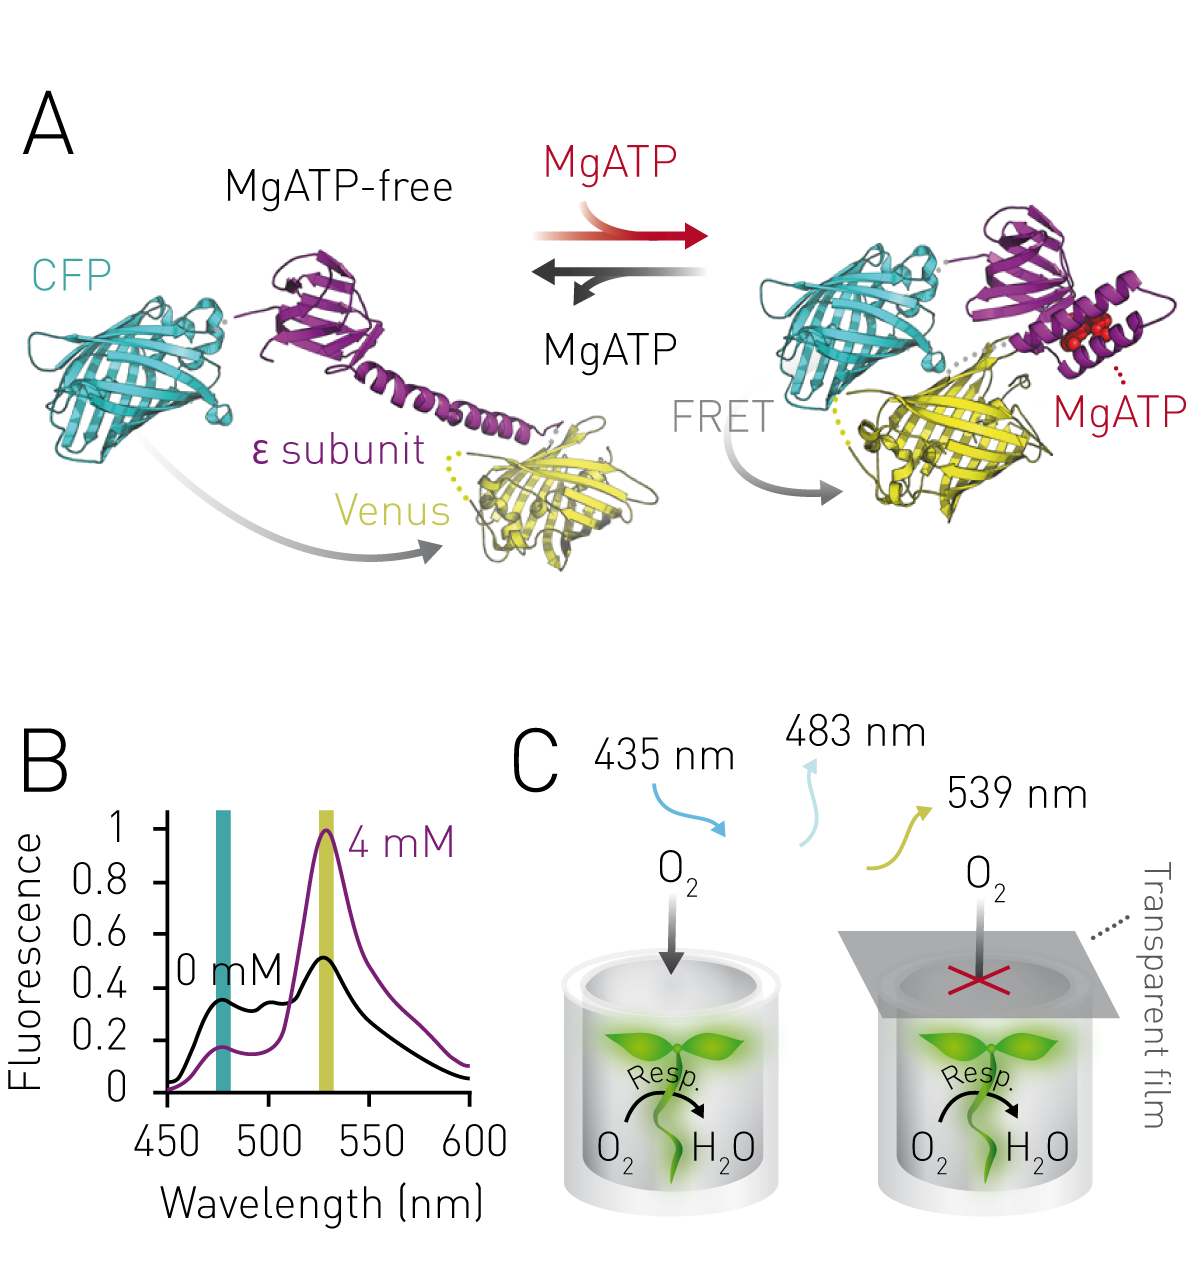 Fig. 1: (A) Structural model of ATeam. The MgATP-binding domain (Ɛ subunit of ATP synthase) is ﬂanked by CFP and Venus. The structural transition from MgATP-free to MgATP-bound form increases the FRET efﬁciency between the two ﬂuorophores. (B) Binding of MgATP at increasing concentrations between 0 and 4 mM leads to a ﬂuorescence emission decrease of the FRET donor CFP (at 483 nm) and a ﬂuorescence emission increase of the FRET acceptor Venus (at 539 nm). (C) Arabidopsis seedlings stably expressing ATeam in the cytosol were exposed to low oxygen stress by restricting oxygen supply to plants submerged in assay medium. Residual oxygen in sealed wells is gradually consumed through active respiration (Resp.). Submerged seedlings in unsealed wells served as control. Figure adapted from Ref. 2.